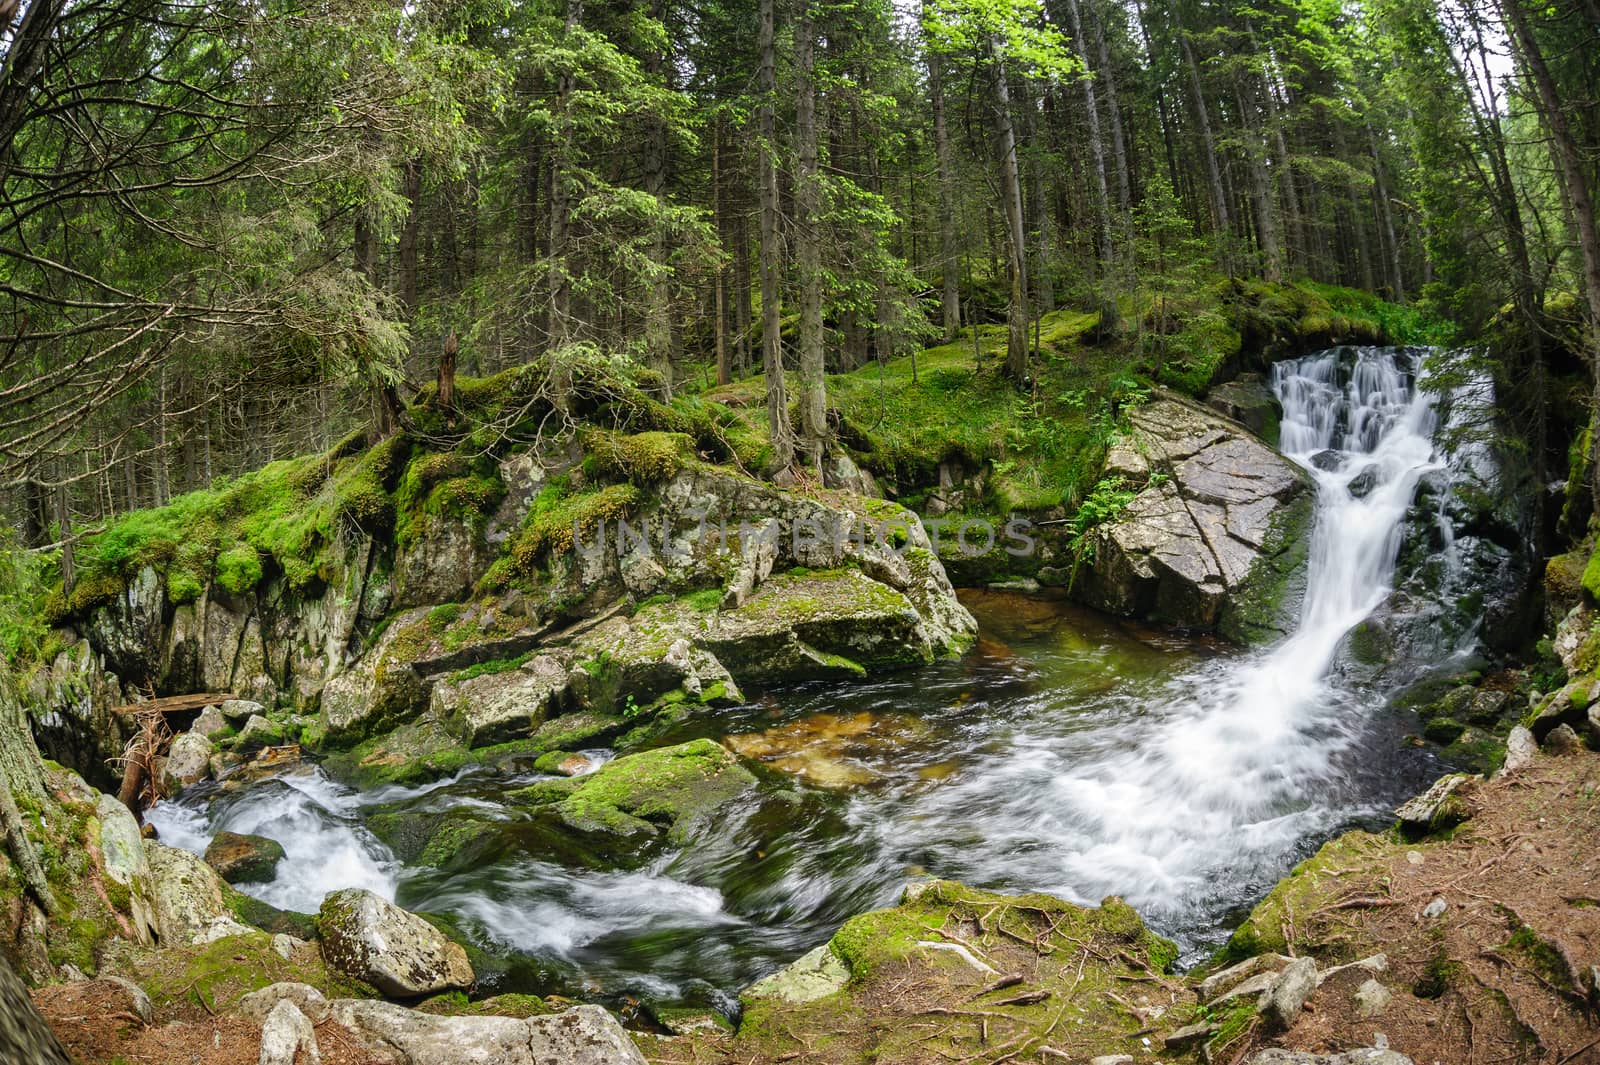 Waterfall in deep forest at mountains, Retezat national park, Romania. Made using fisheye lens.